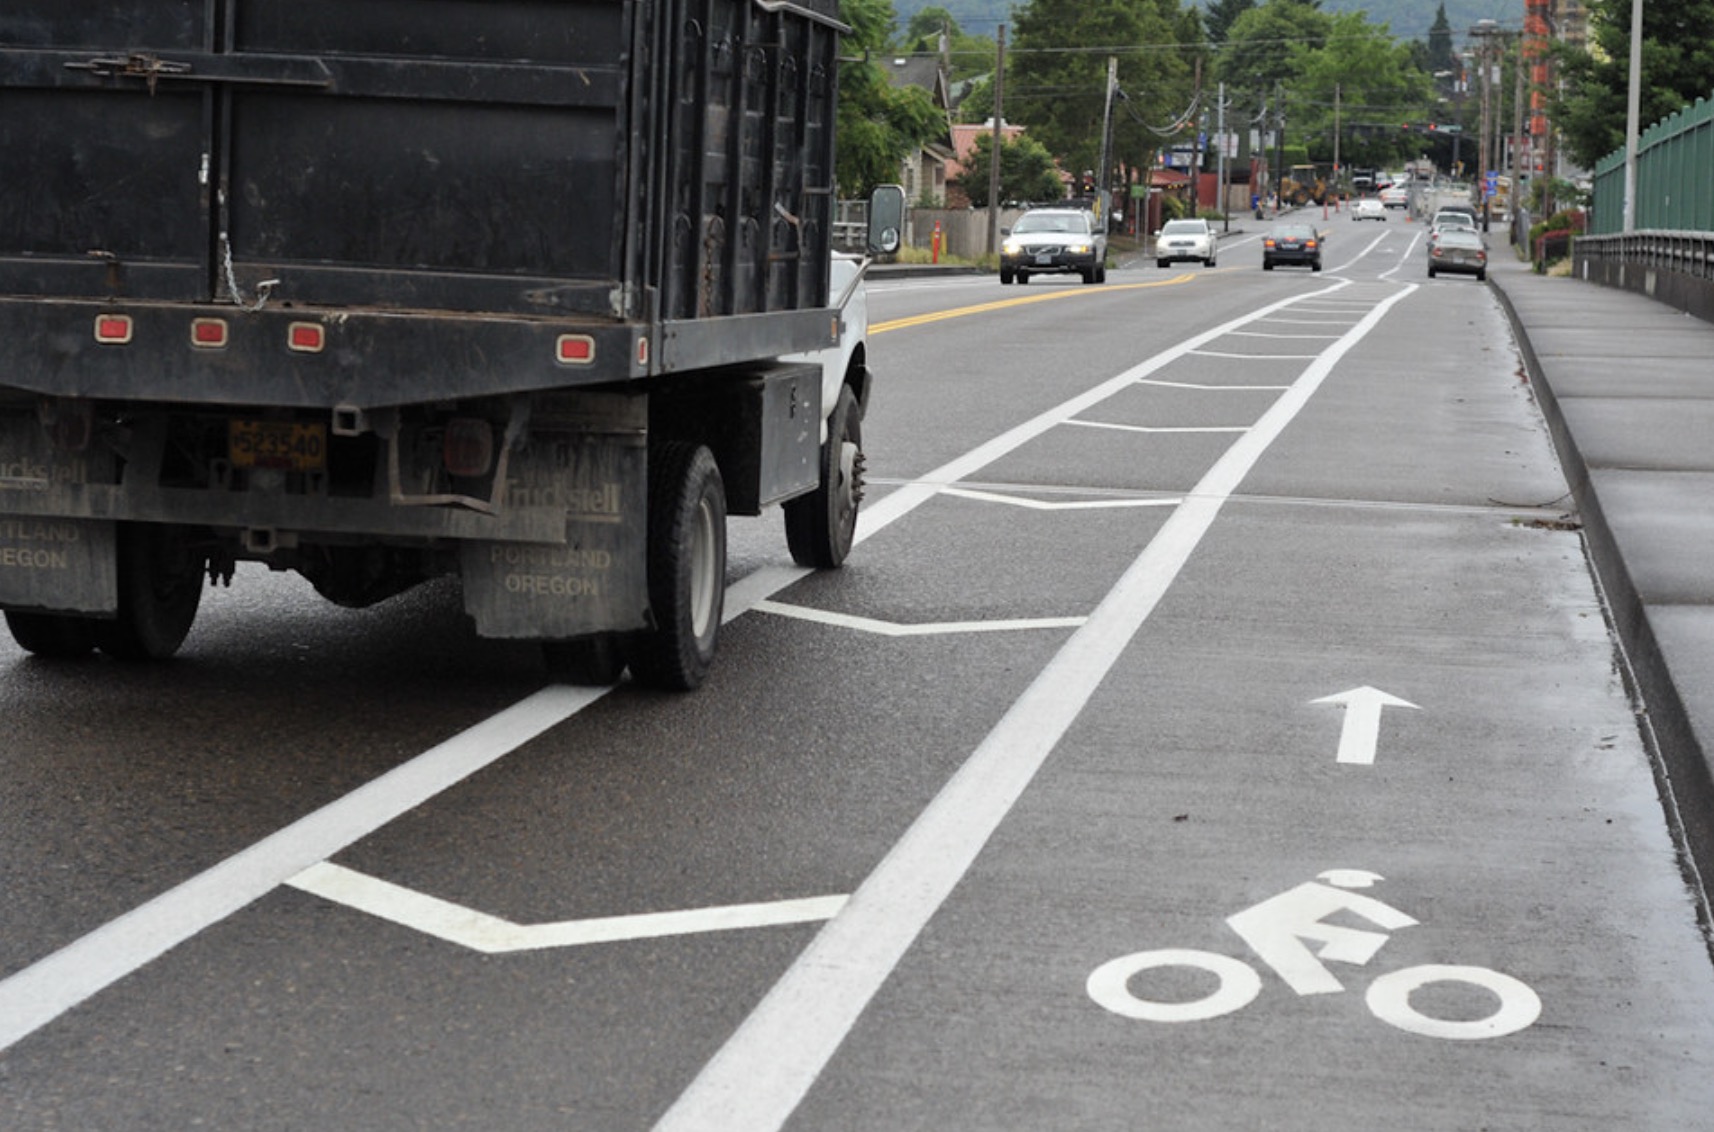 Trucking advocates say they've been squeezed by road diets, want